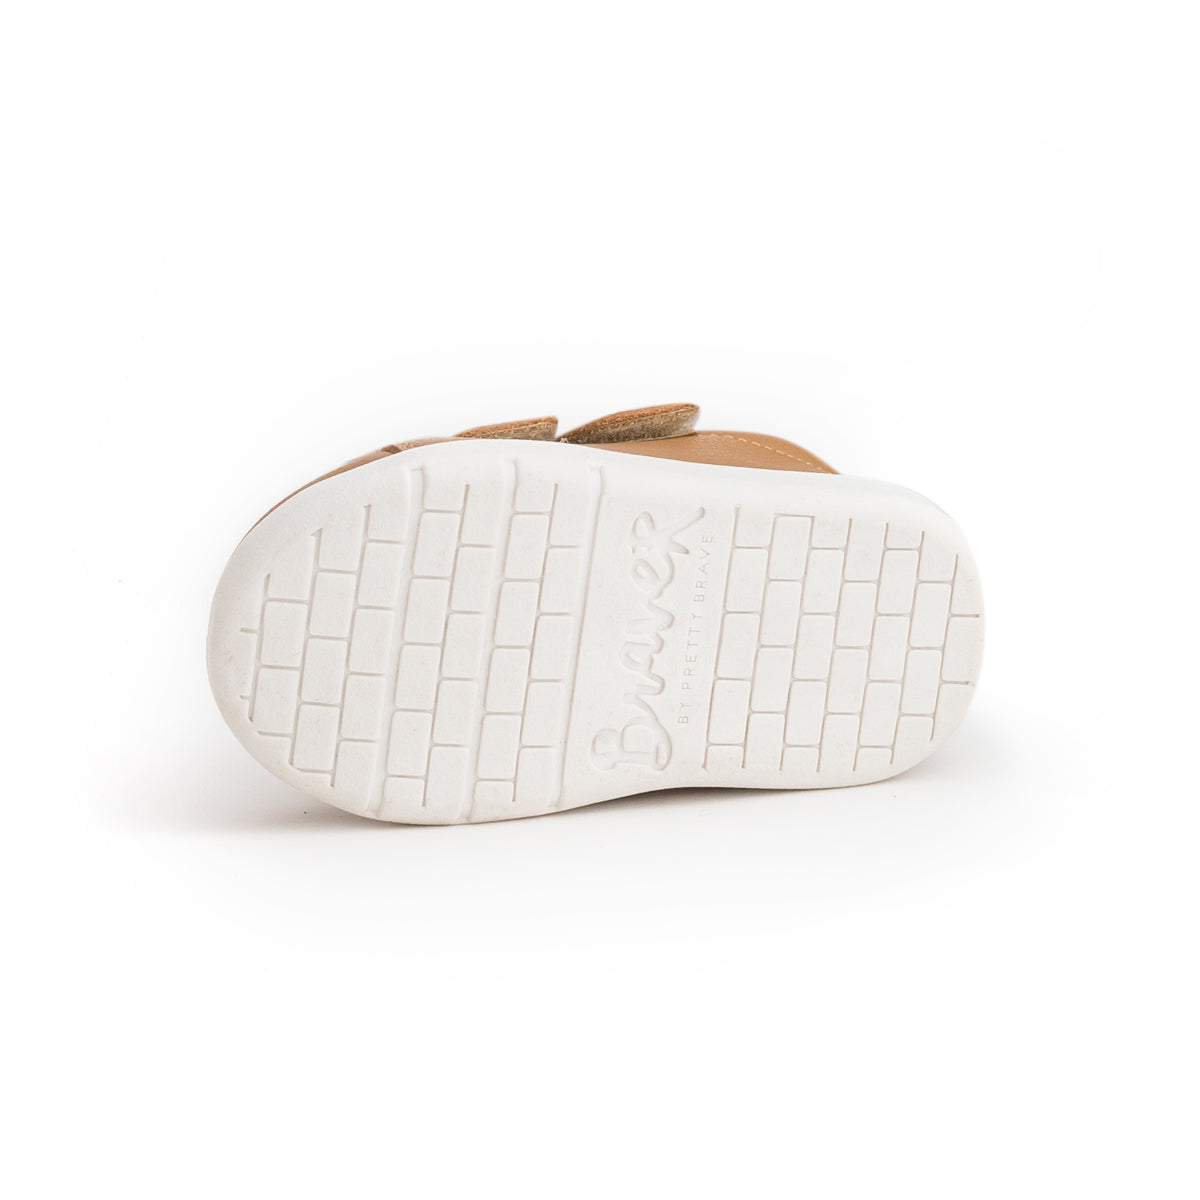 Sole of Brooklyn shoes with velcro strap in colour Tan